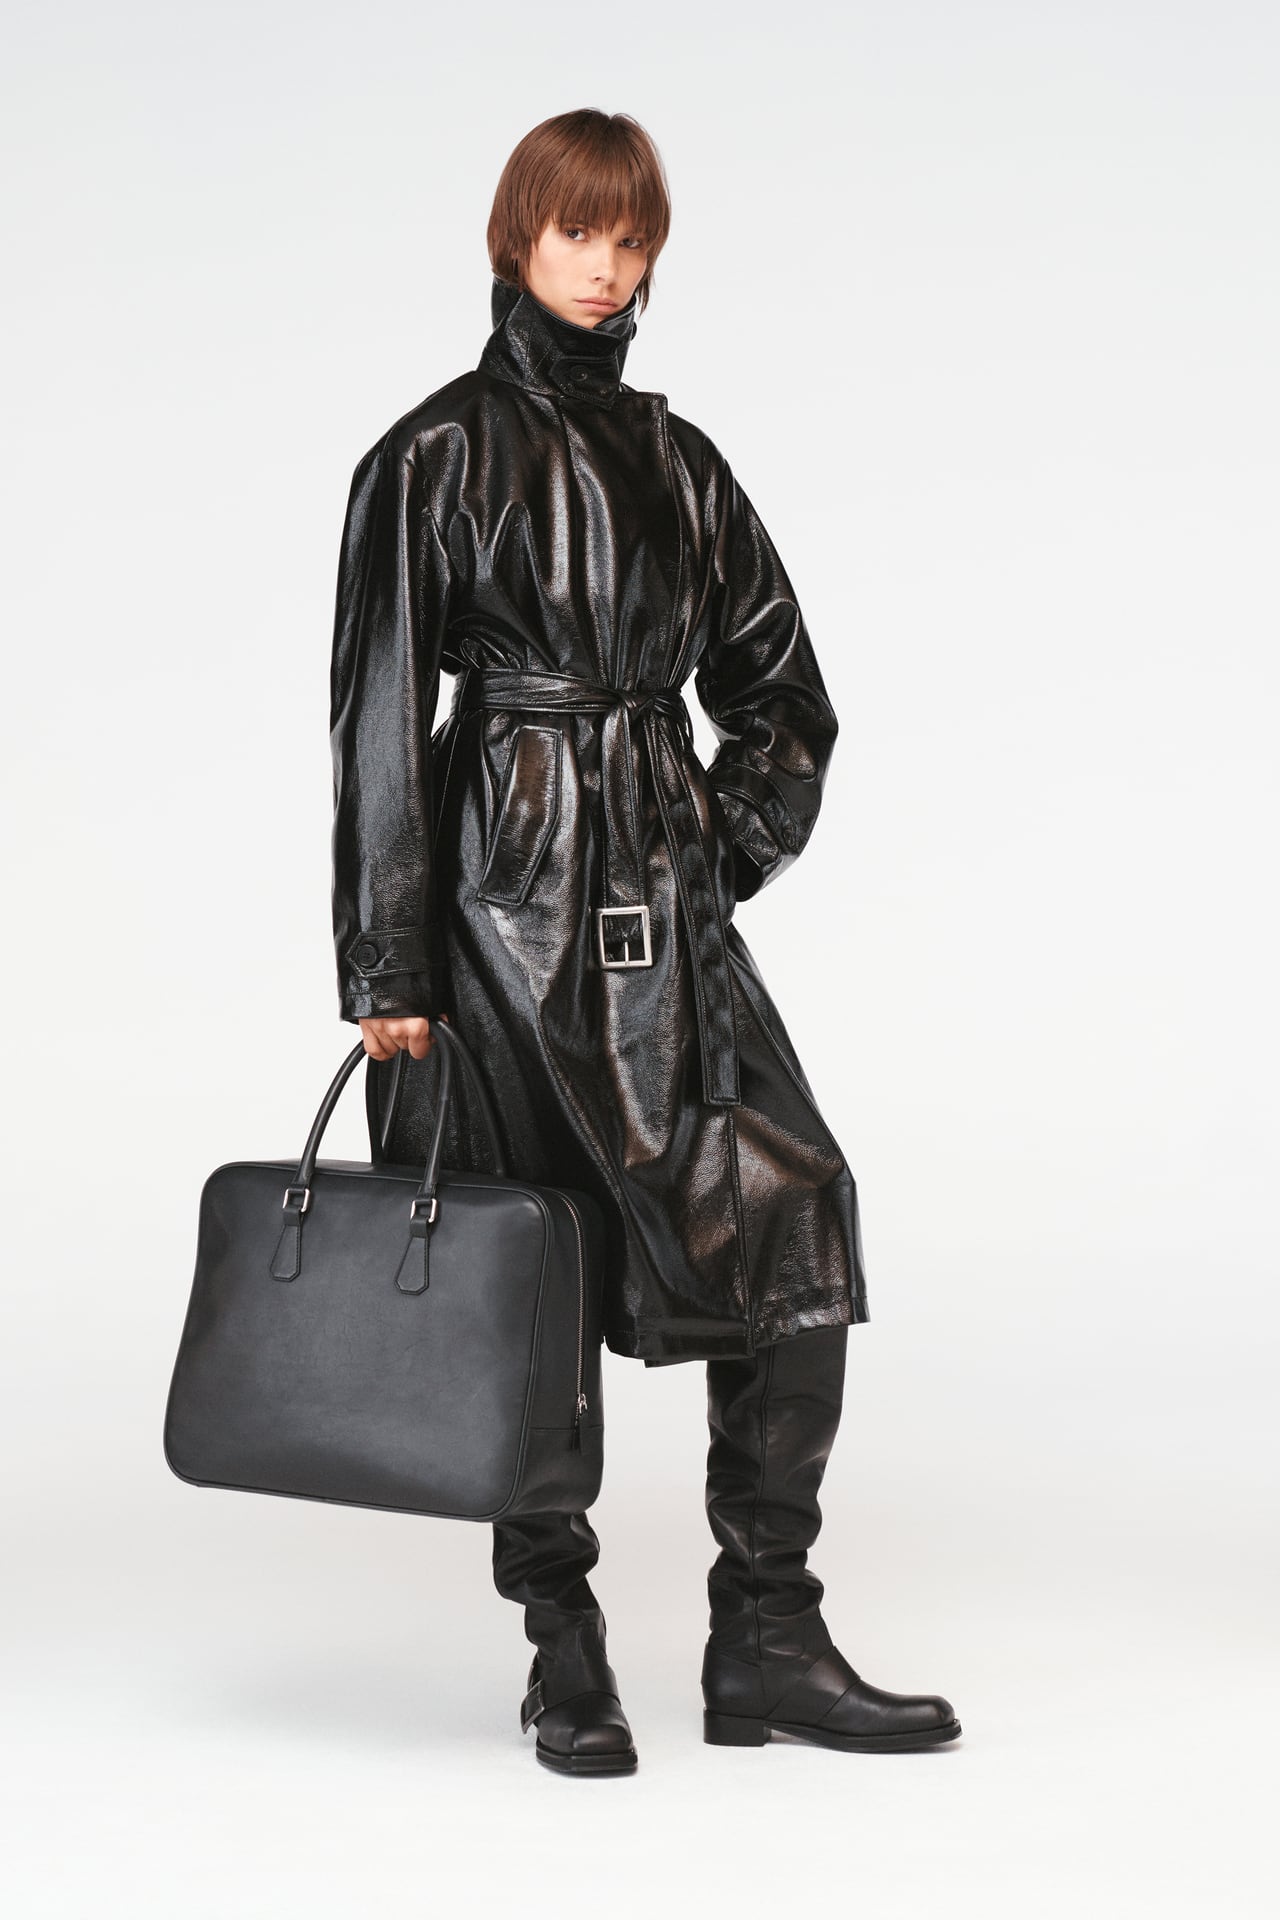 STEVEN MEISEL TRENCH COAT WITH BELT

149.00 GBP
Long trench coat with a lapel collar and long sleeves with buttoned tabs. Front pockets. Belt in matching fabric with adjustable metal buckle. Back vent at the hem with buttoned tab. Front fastening with matching buttons.